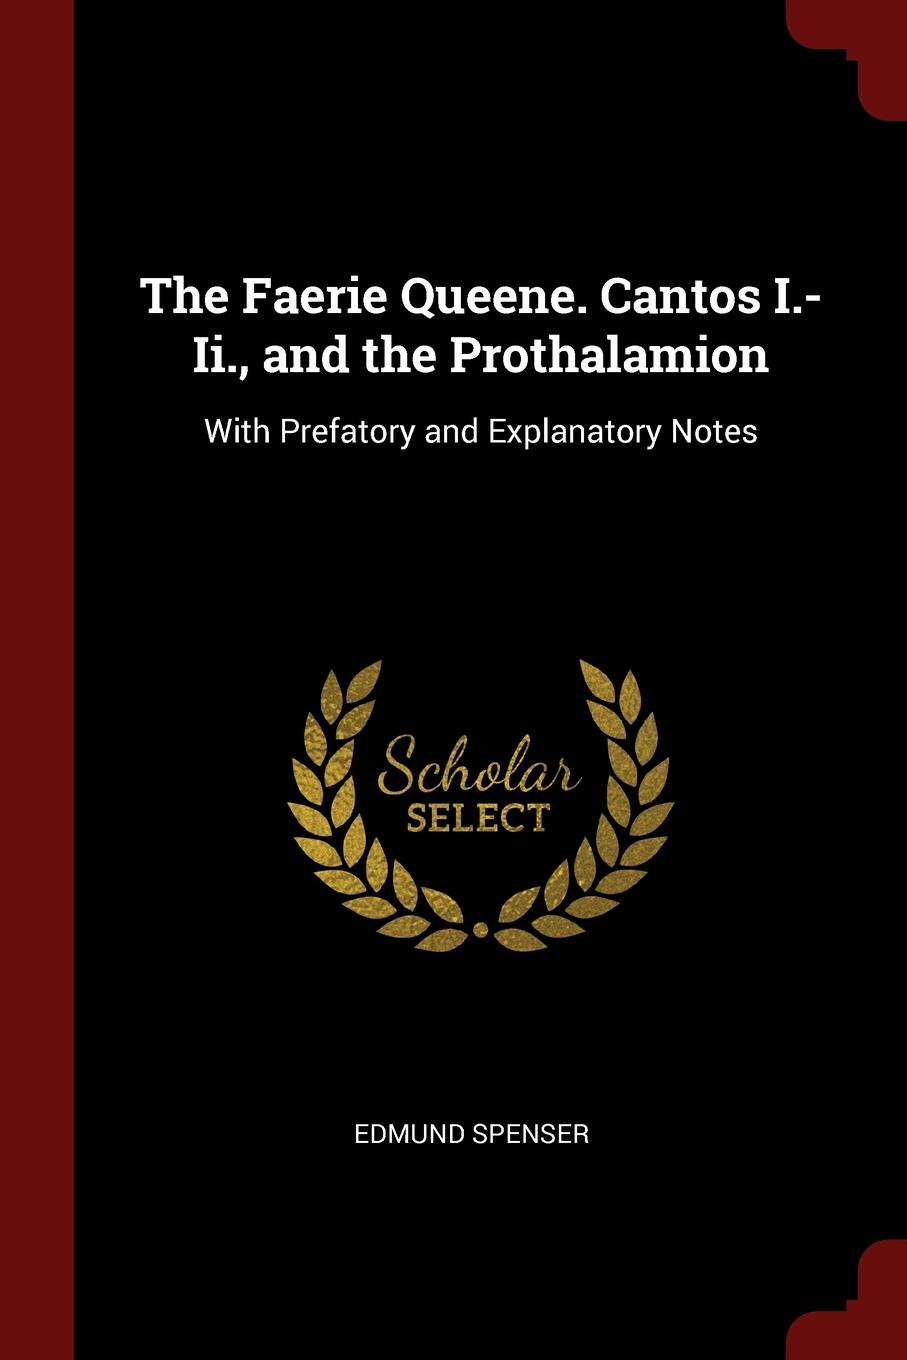 The Faerie Queene. Cantos I.-Ii., and the Prothalamion. With Prefatory and Explanatory Notes